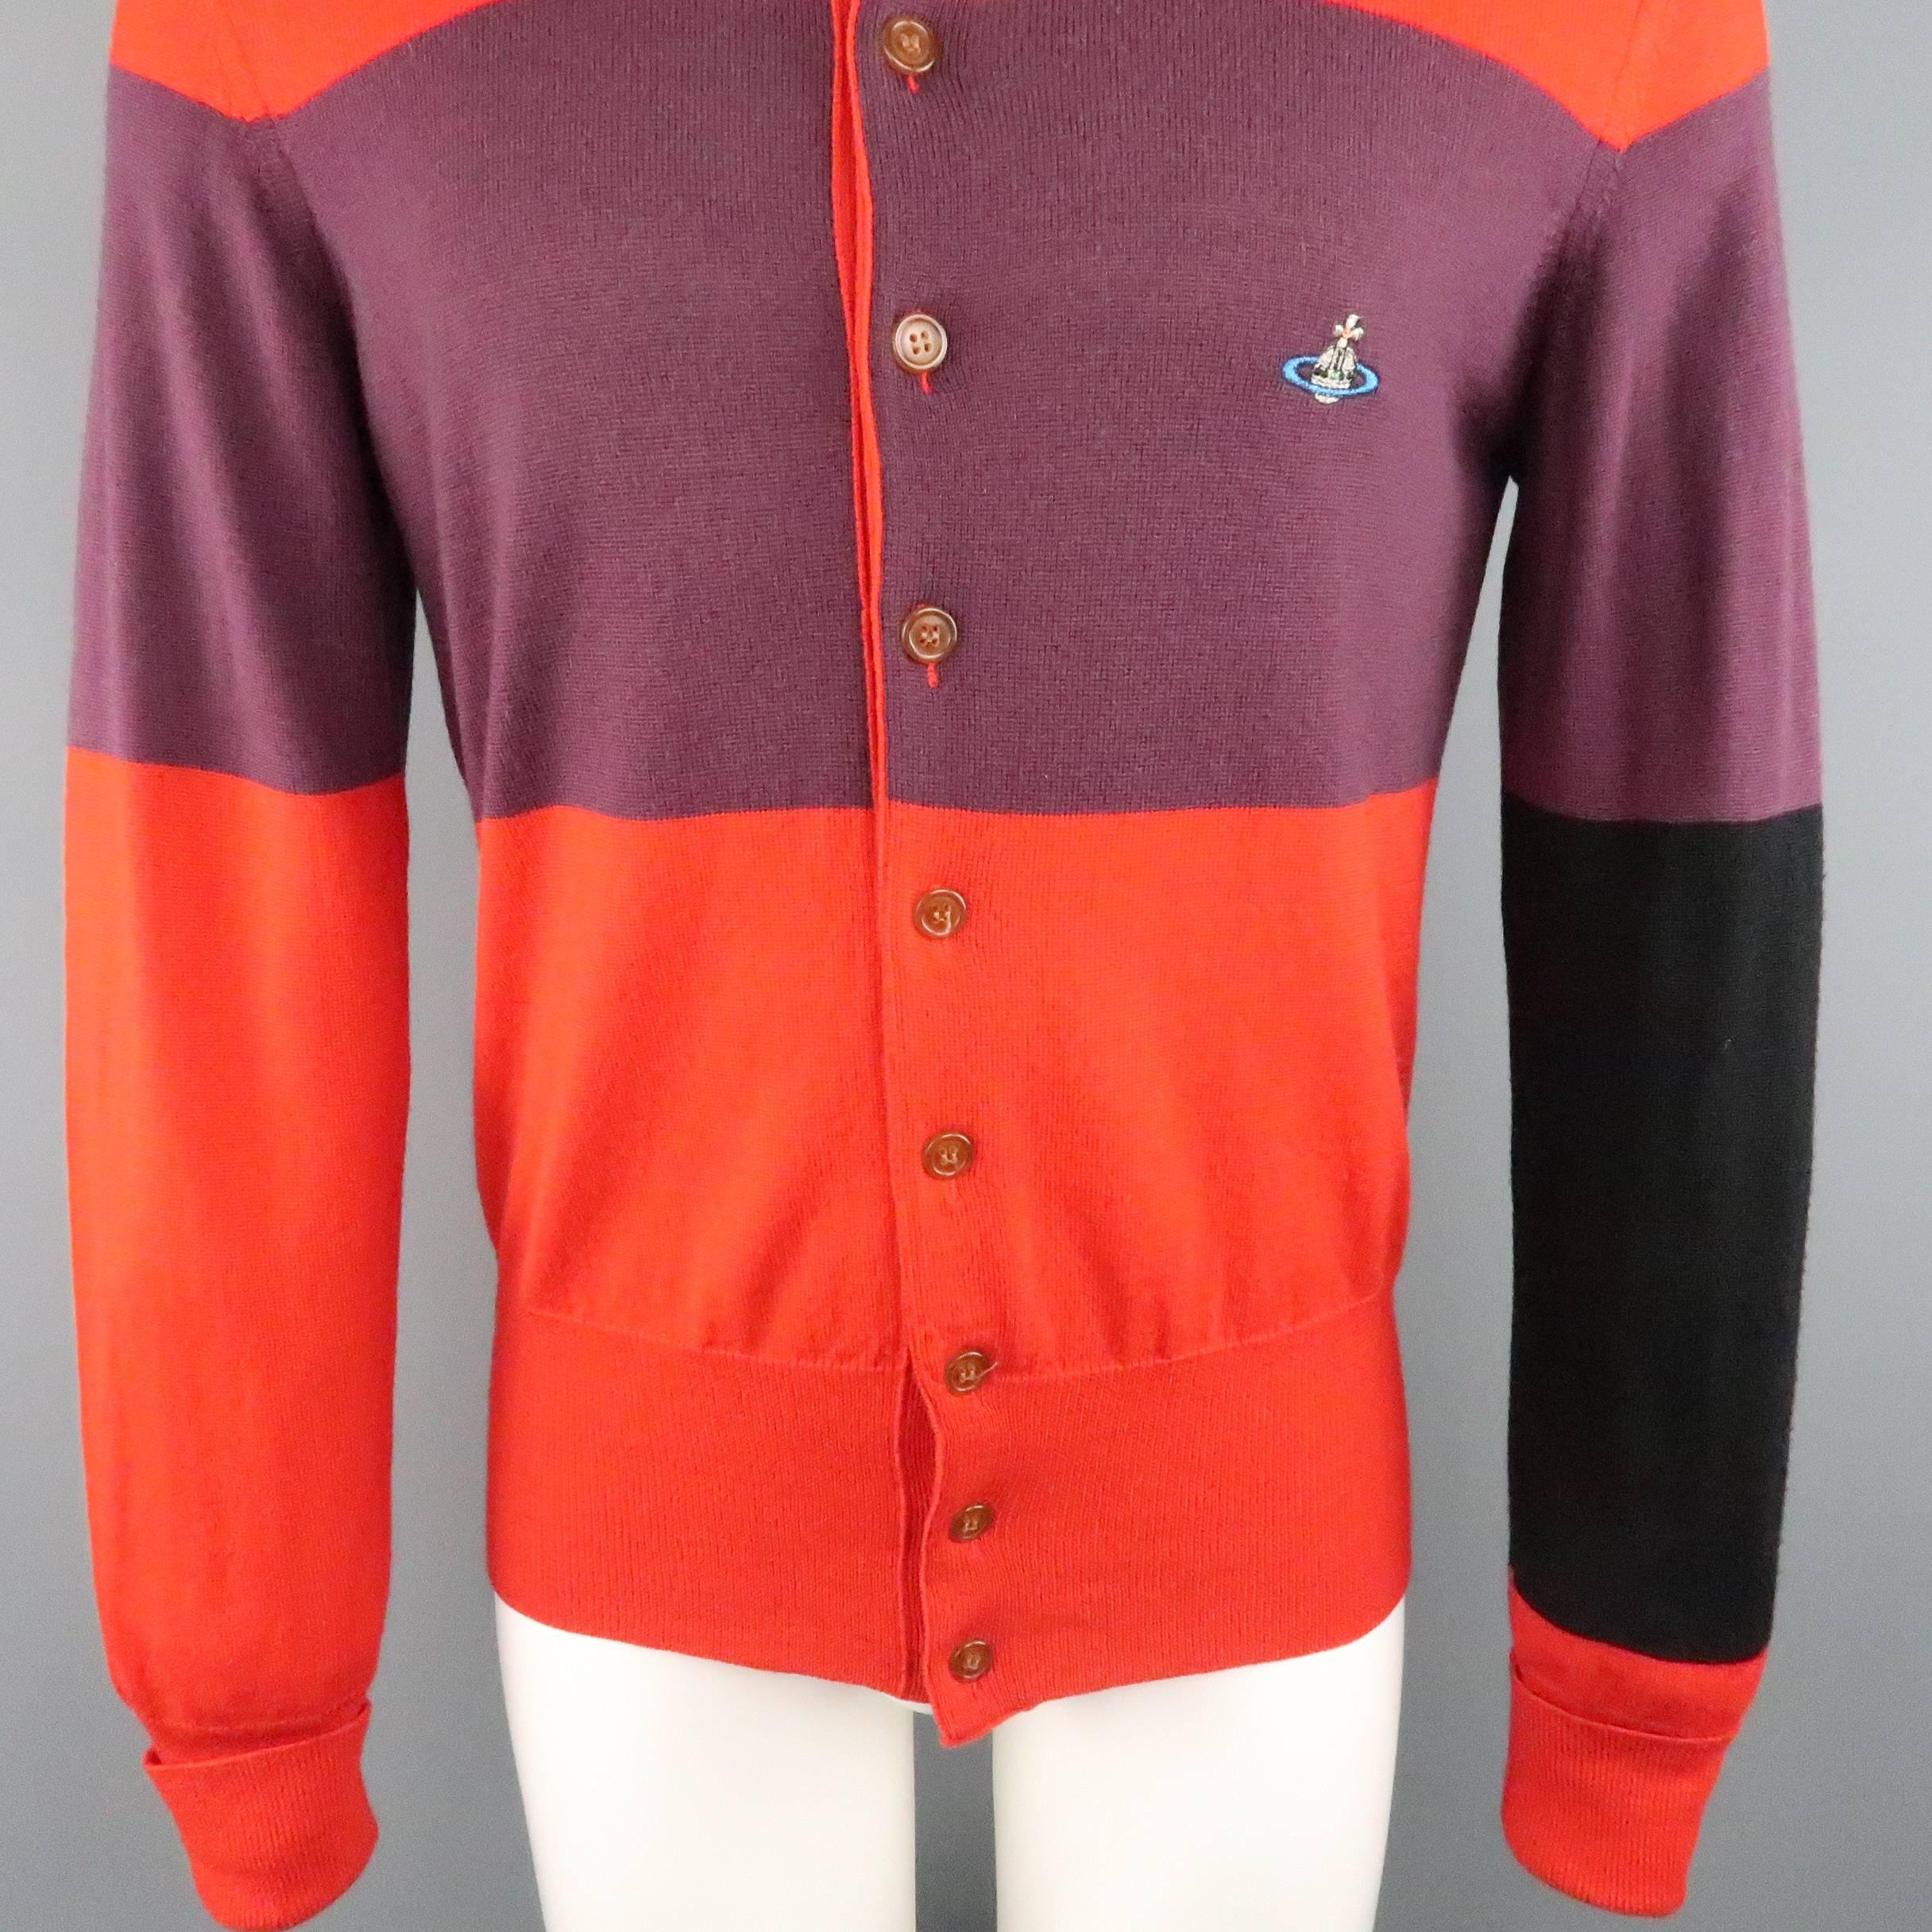 VIVIENNE WESTWOOD MAN cardigan comes in a bold red wool with color block purple and navy stripe pattern featuring an embroidered orb logo and cuffed sleeves. Imperfection on cuff. As-Is. Made in Italy.
 
Good Pre-Owned Condition.
Marked: S
